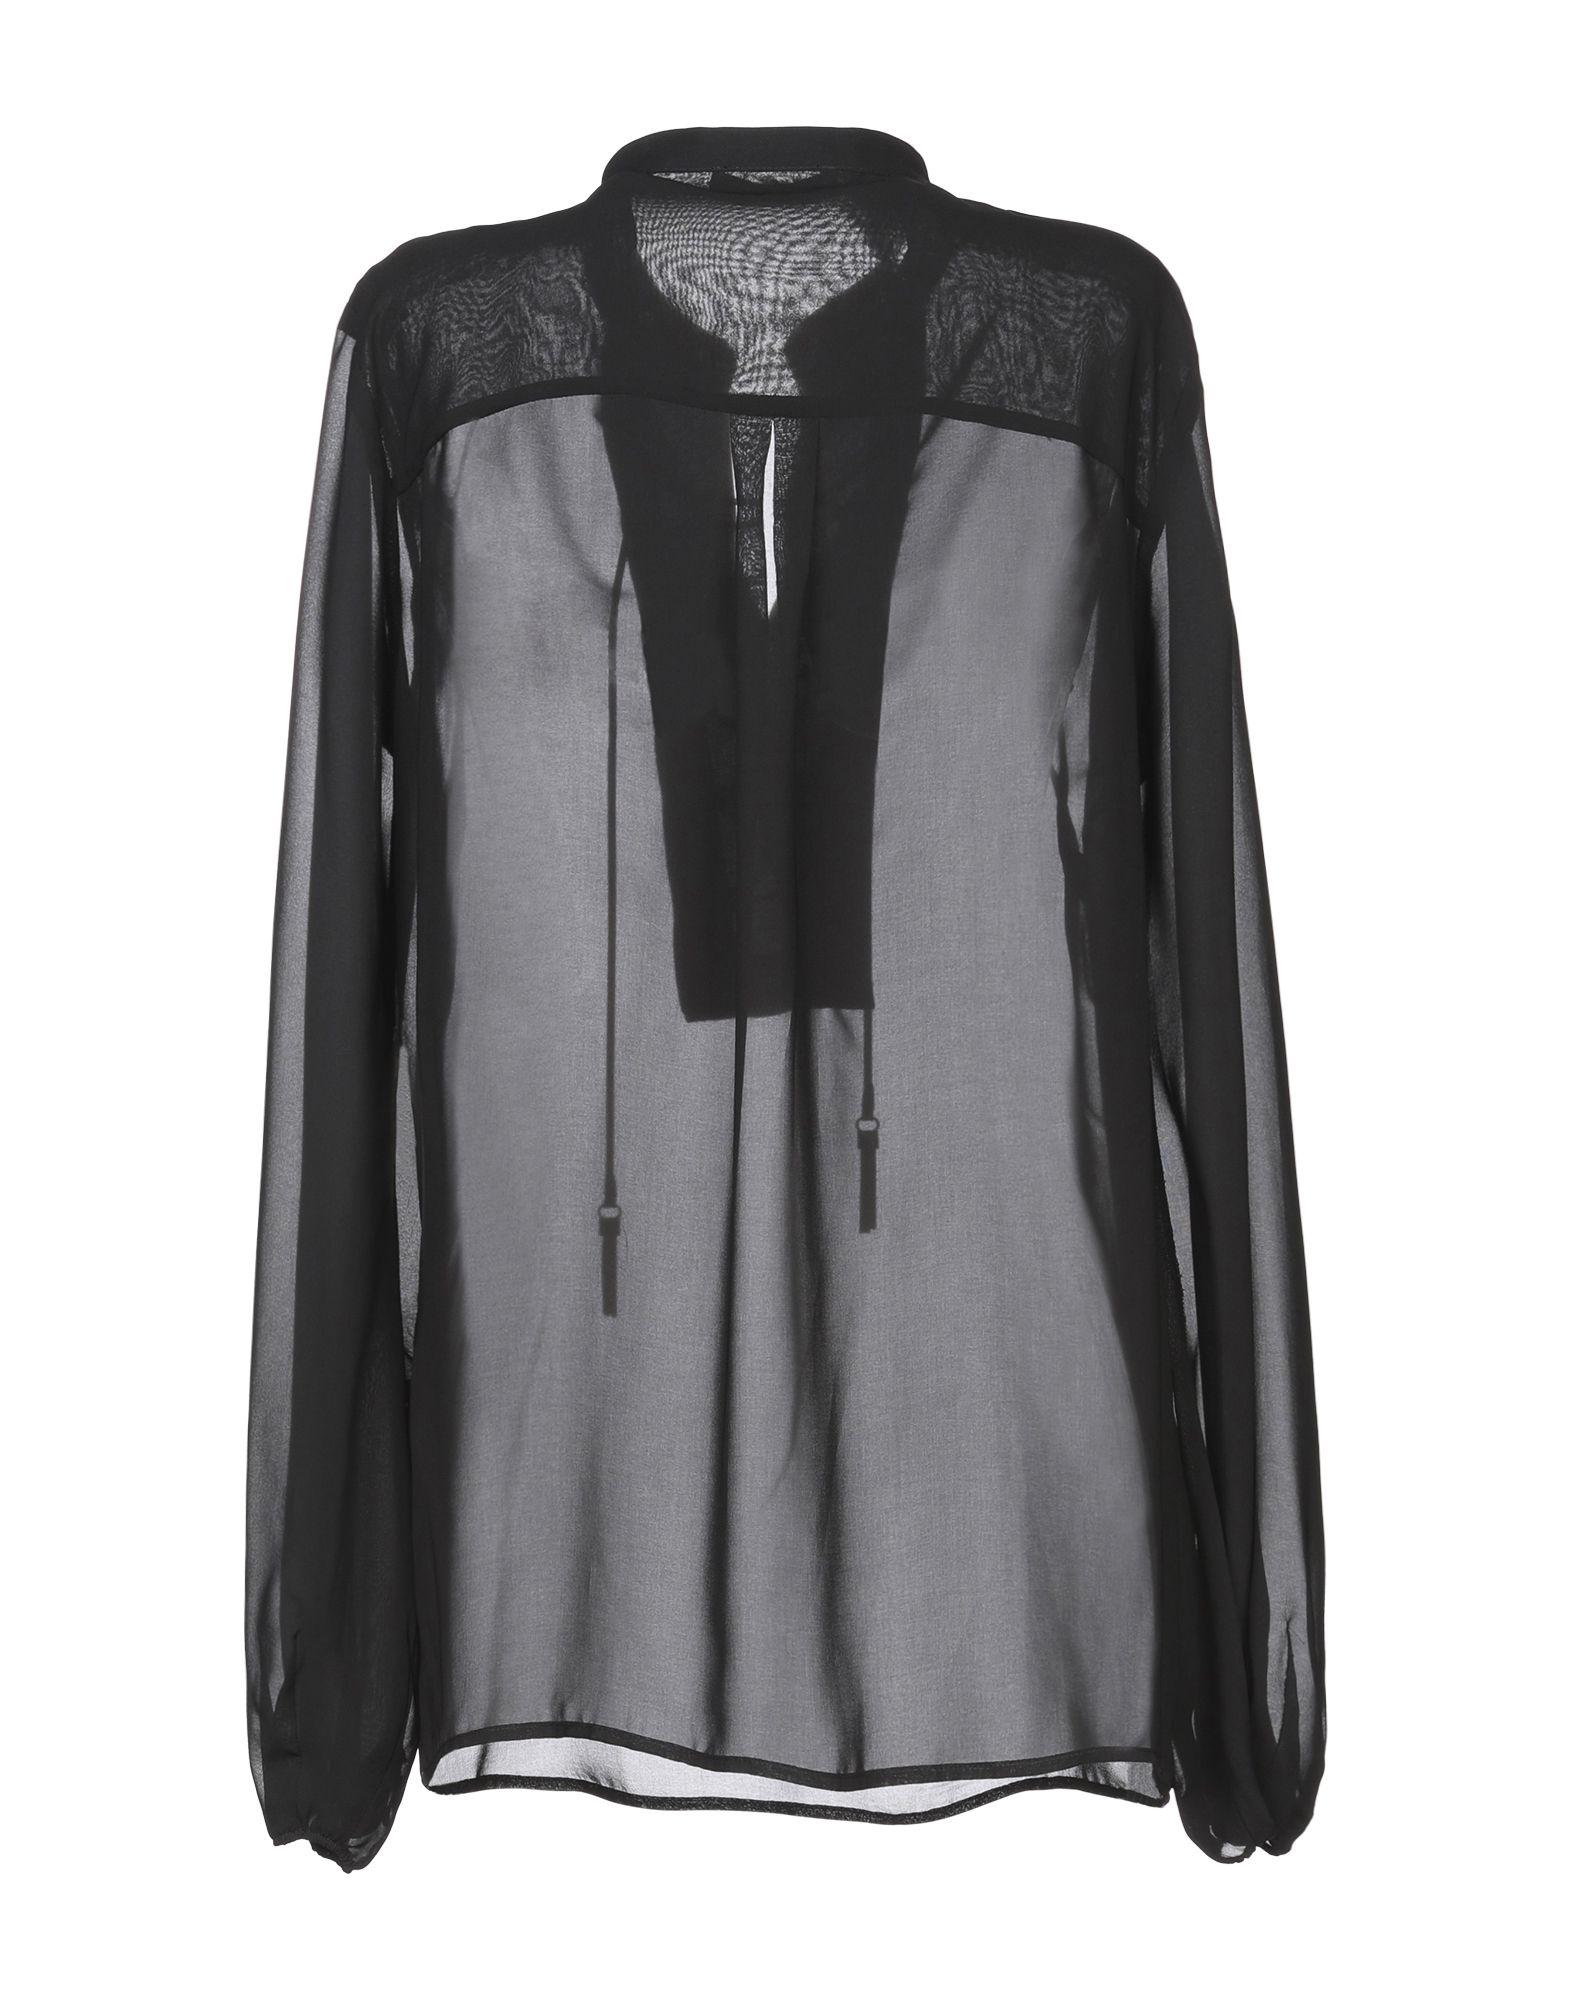 Versace Synthetic Blouse in Black - Lyst